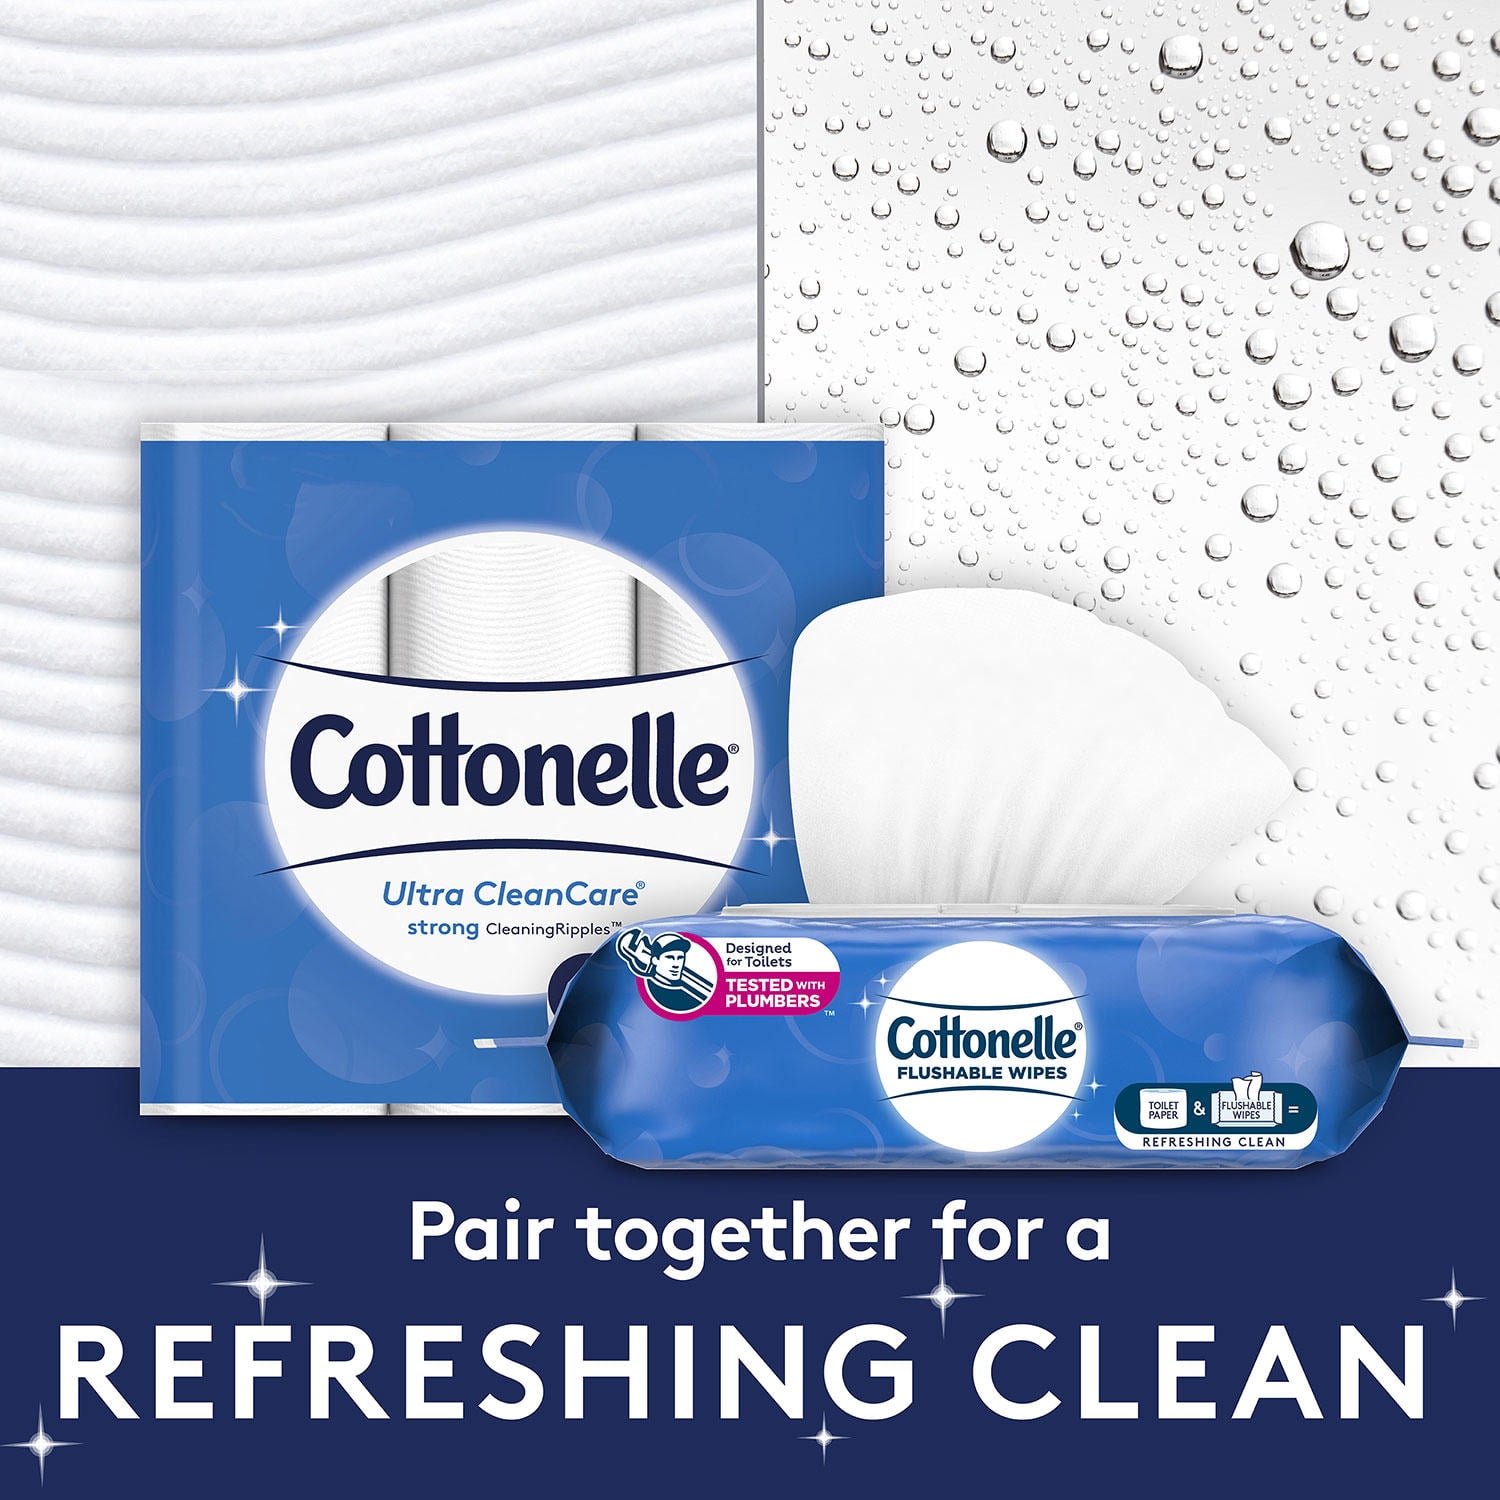 Free Shipping!! Cottonelle Flushable Wipes 504 ct. 